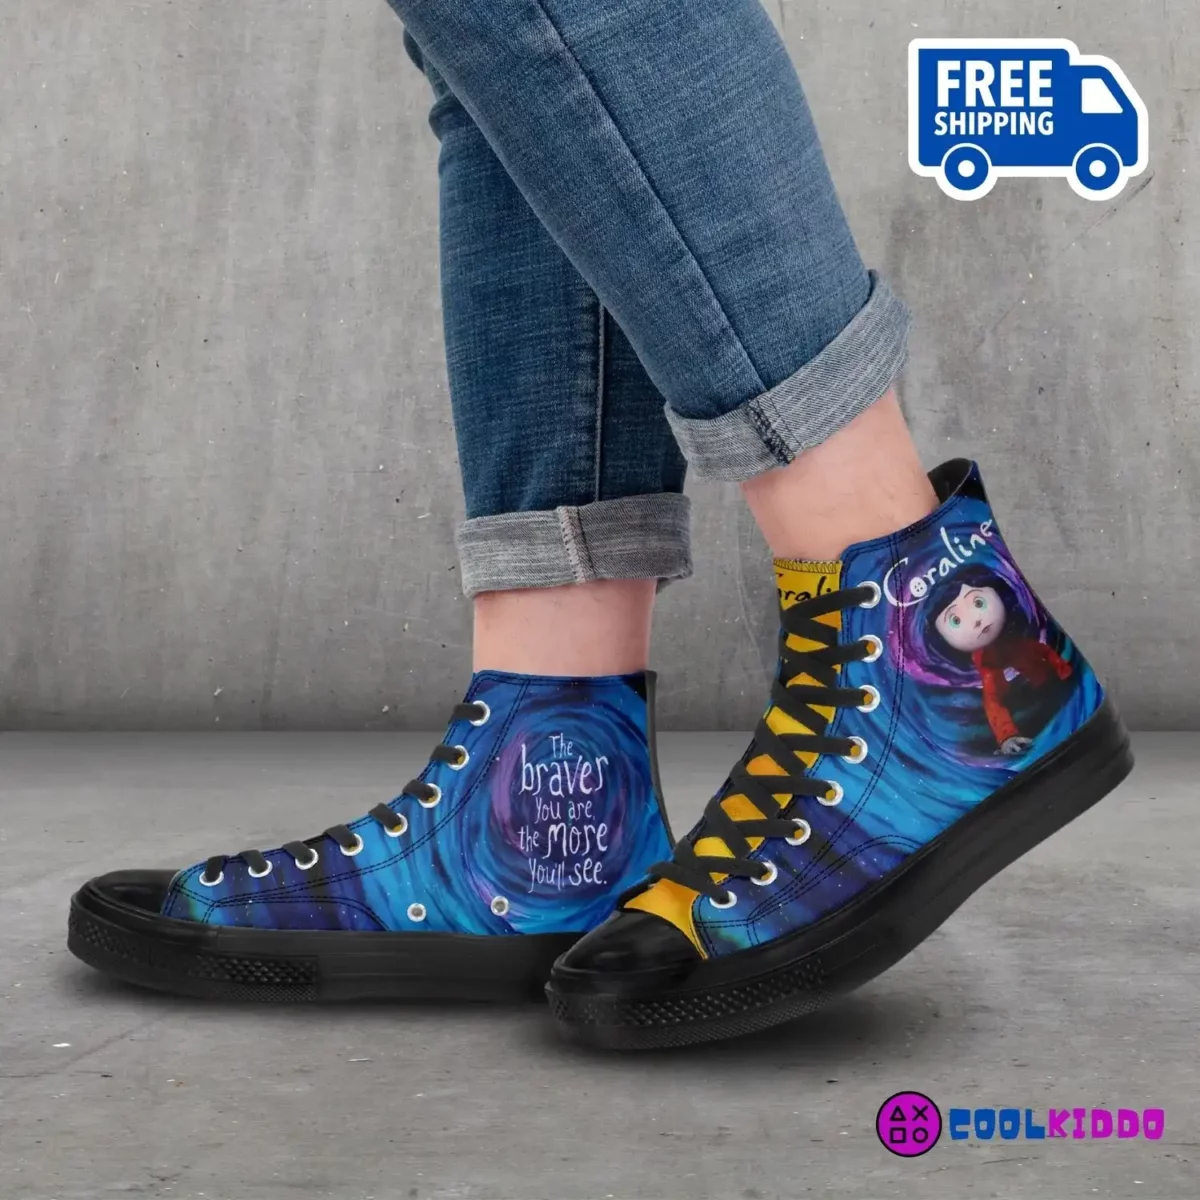 Custom Coraline High-Top Canvas Sneakers, Tim Burton’s animated movie Inspired Casual Shoes for Youth/Adults Cool Kiddo 22